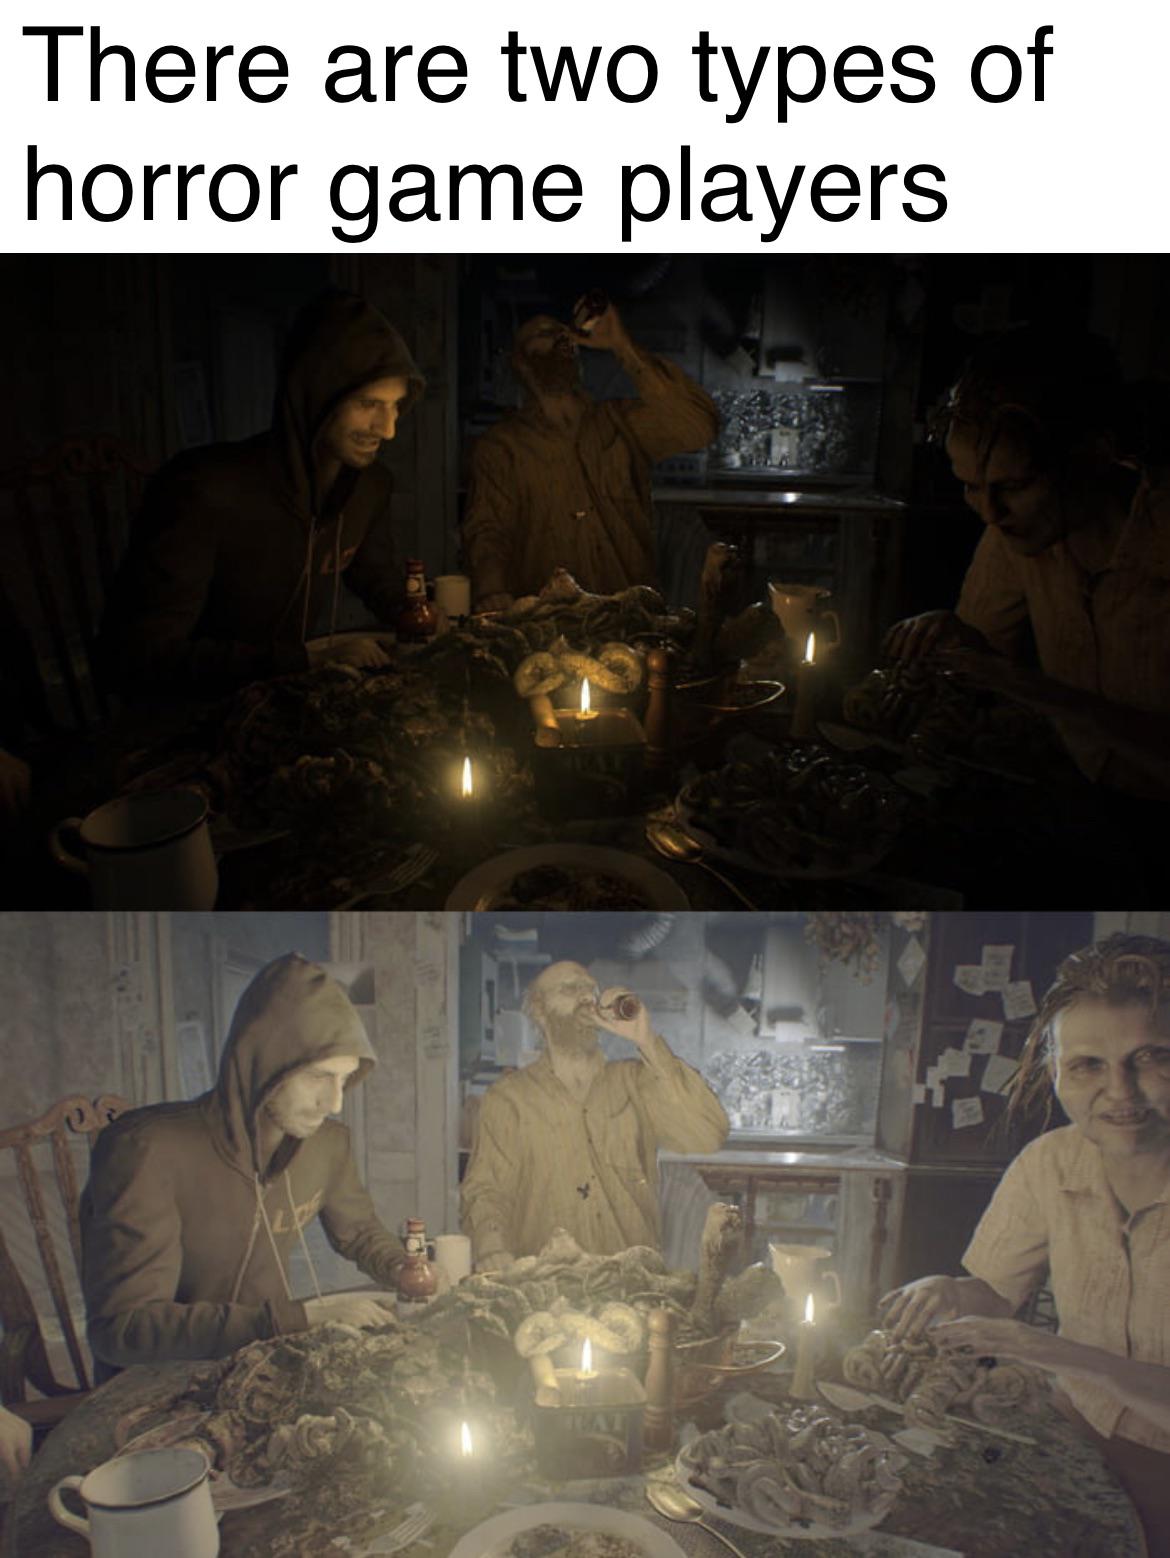 dank memes - There are two types of horror game players 12 120